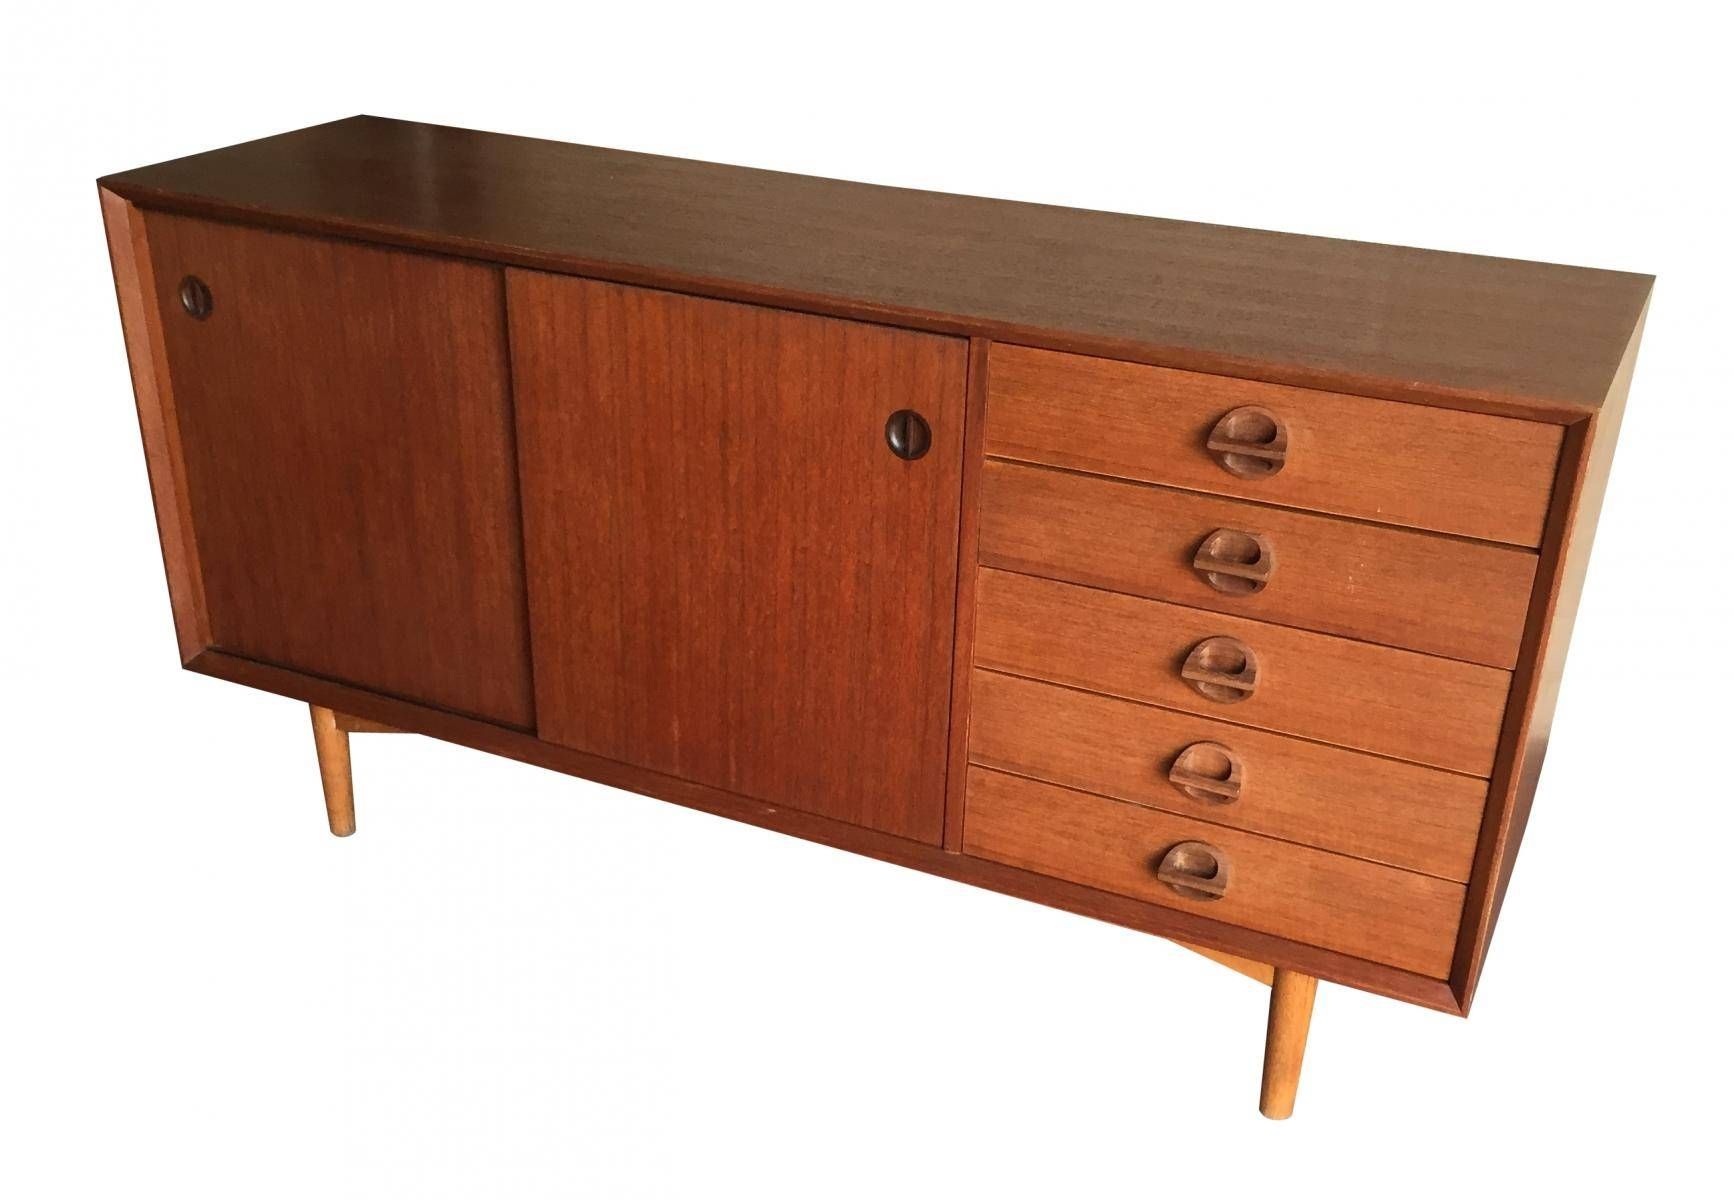 Vintage Sideboard With Sliding Doors, 1960s For Sale At Pamono With Regard To Vintage Sideboards (View 1 of 15)